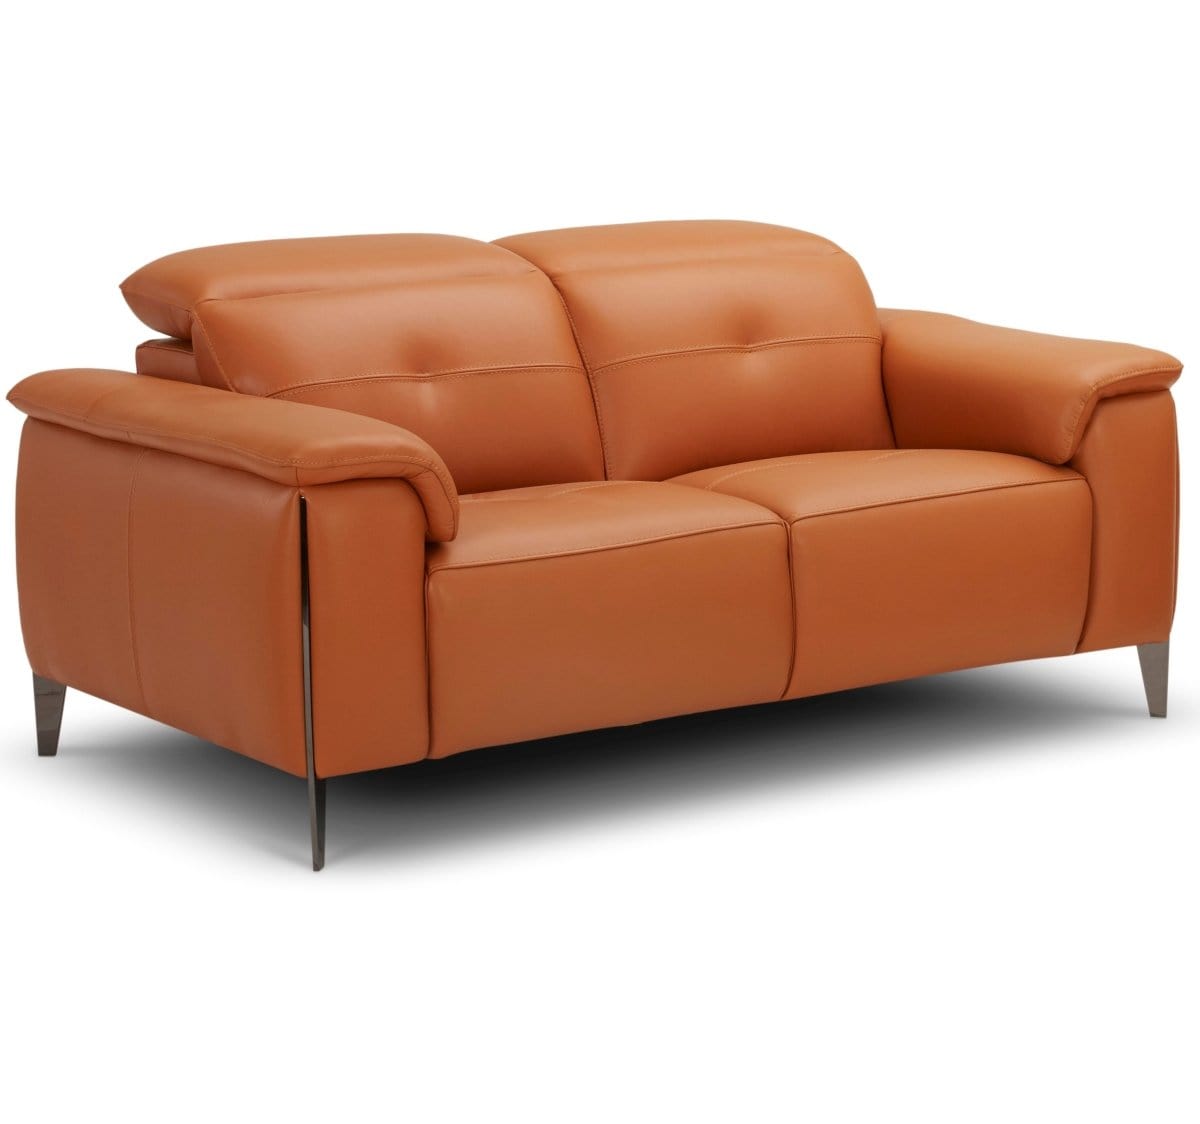 KUKA KM.5065 Leather Electrical Recliner Sofa 2/3-Seater (M Series) (I) picket and rail